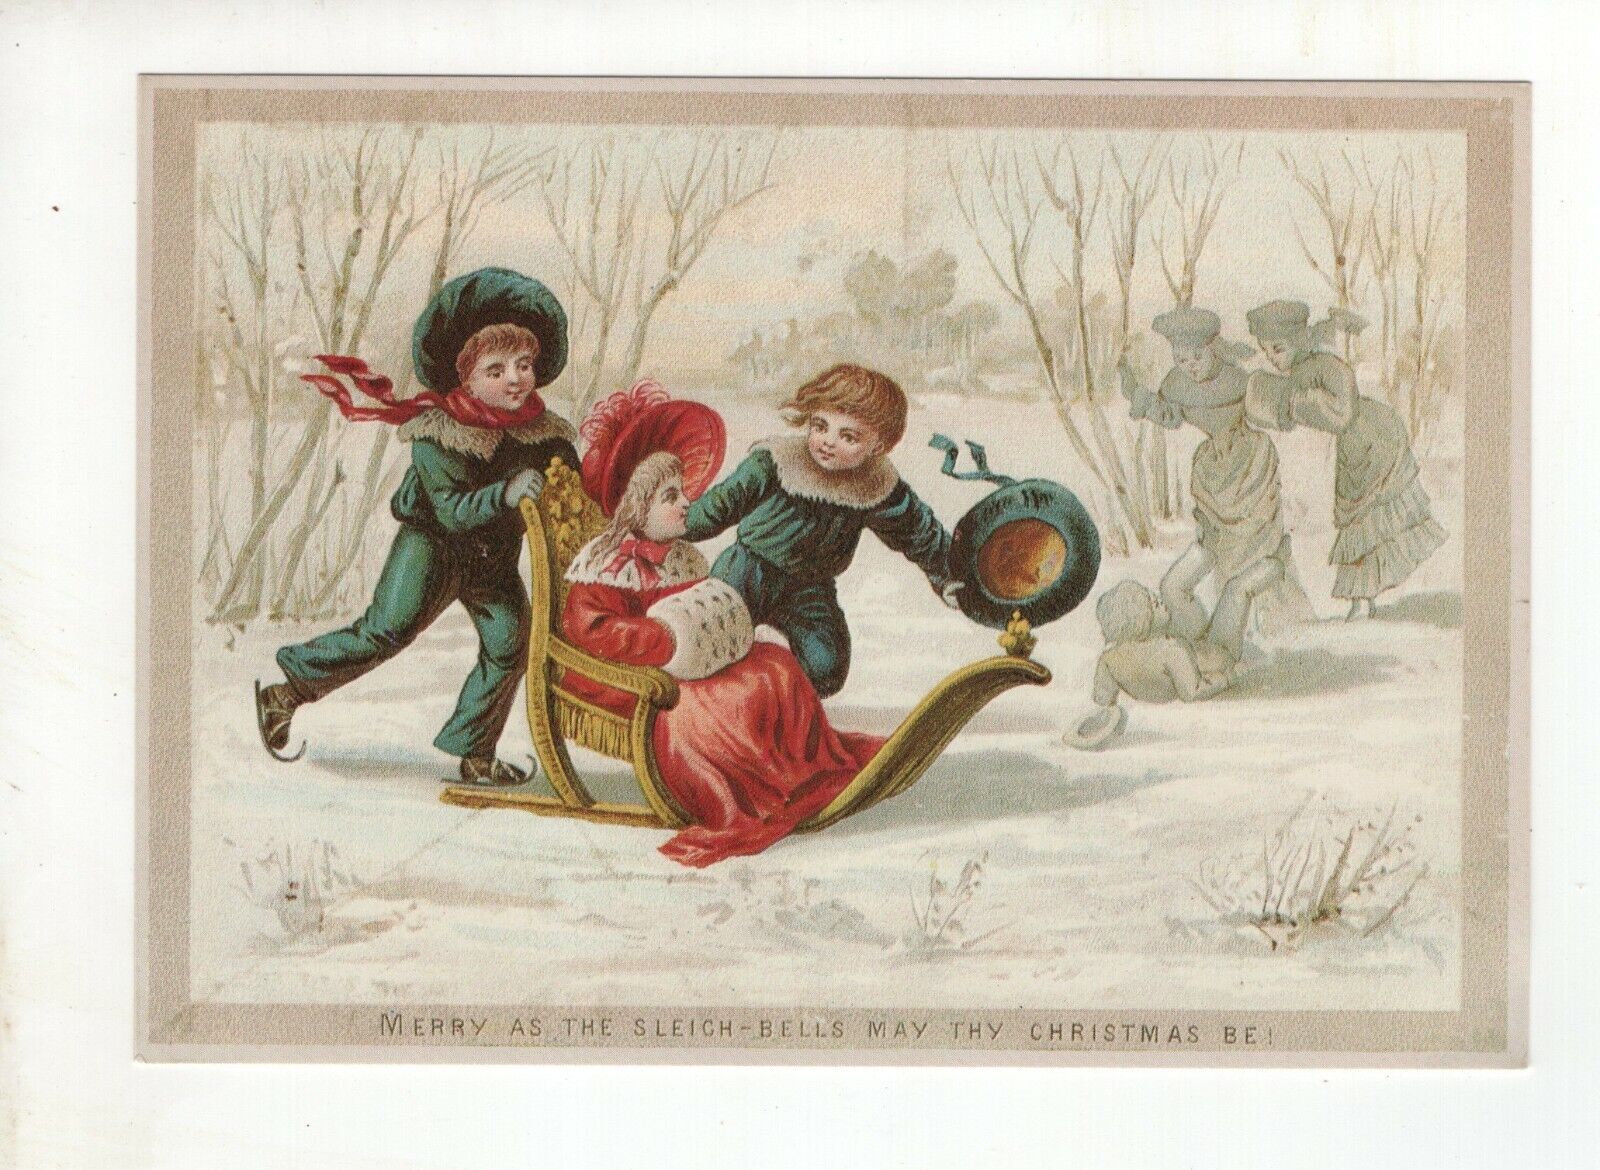 Vintage Christmas Post Card - Merry as the Sleigh Bells May Thy Christmas Be